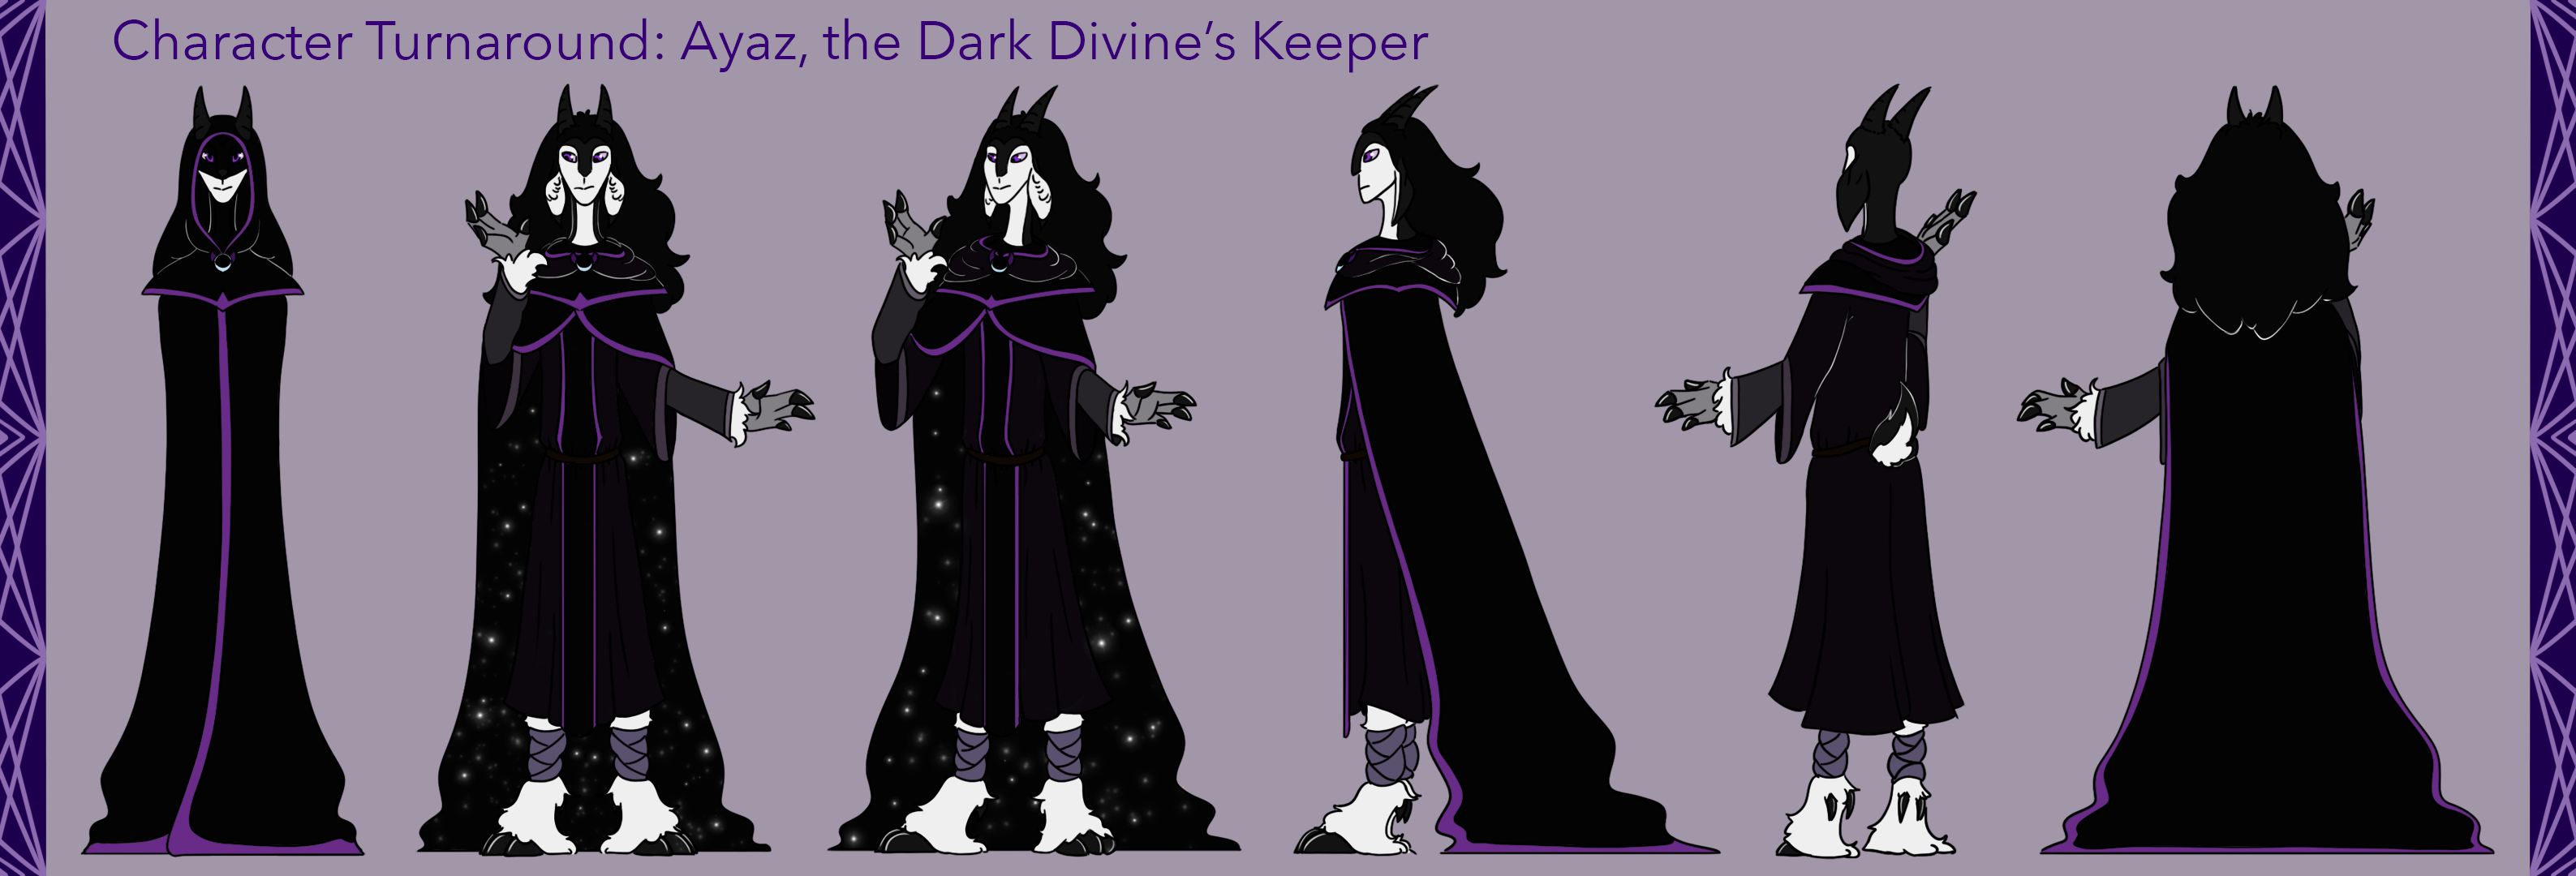  / 5-Point Turnaround of Ayaz, the Dark Divine's Keeper. Drawn and colored in Photoshop.